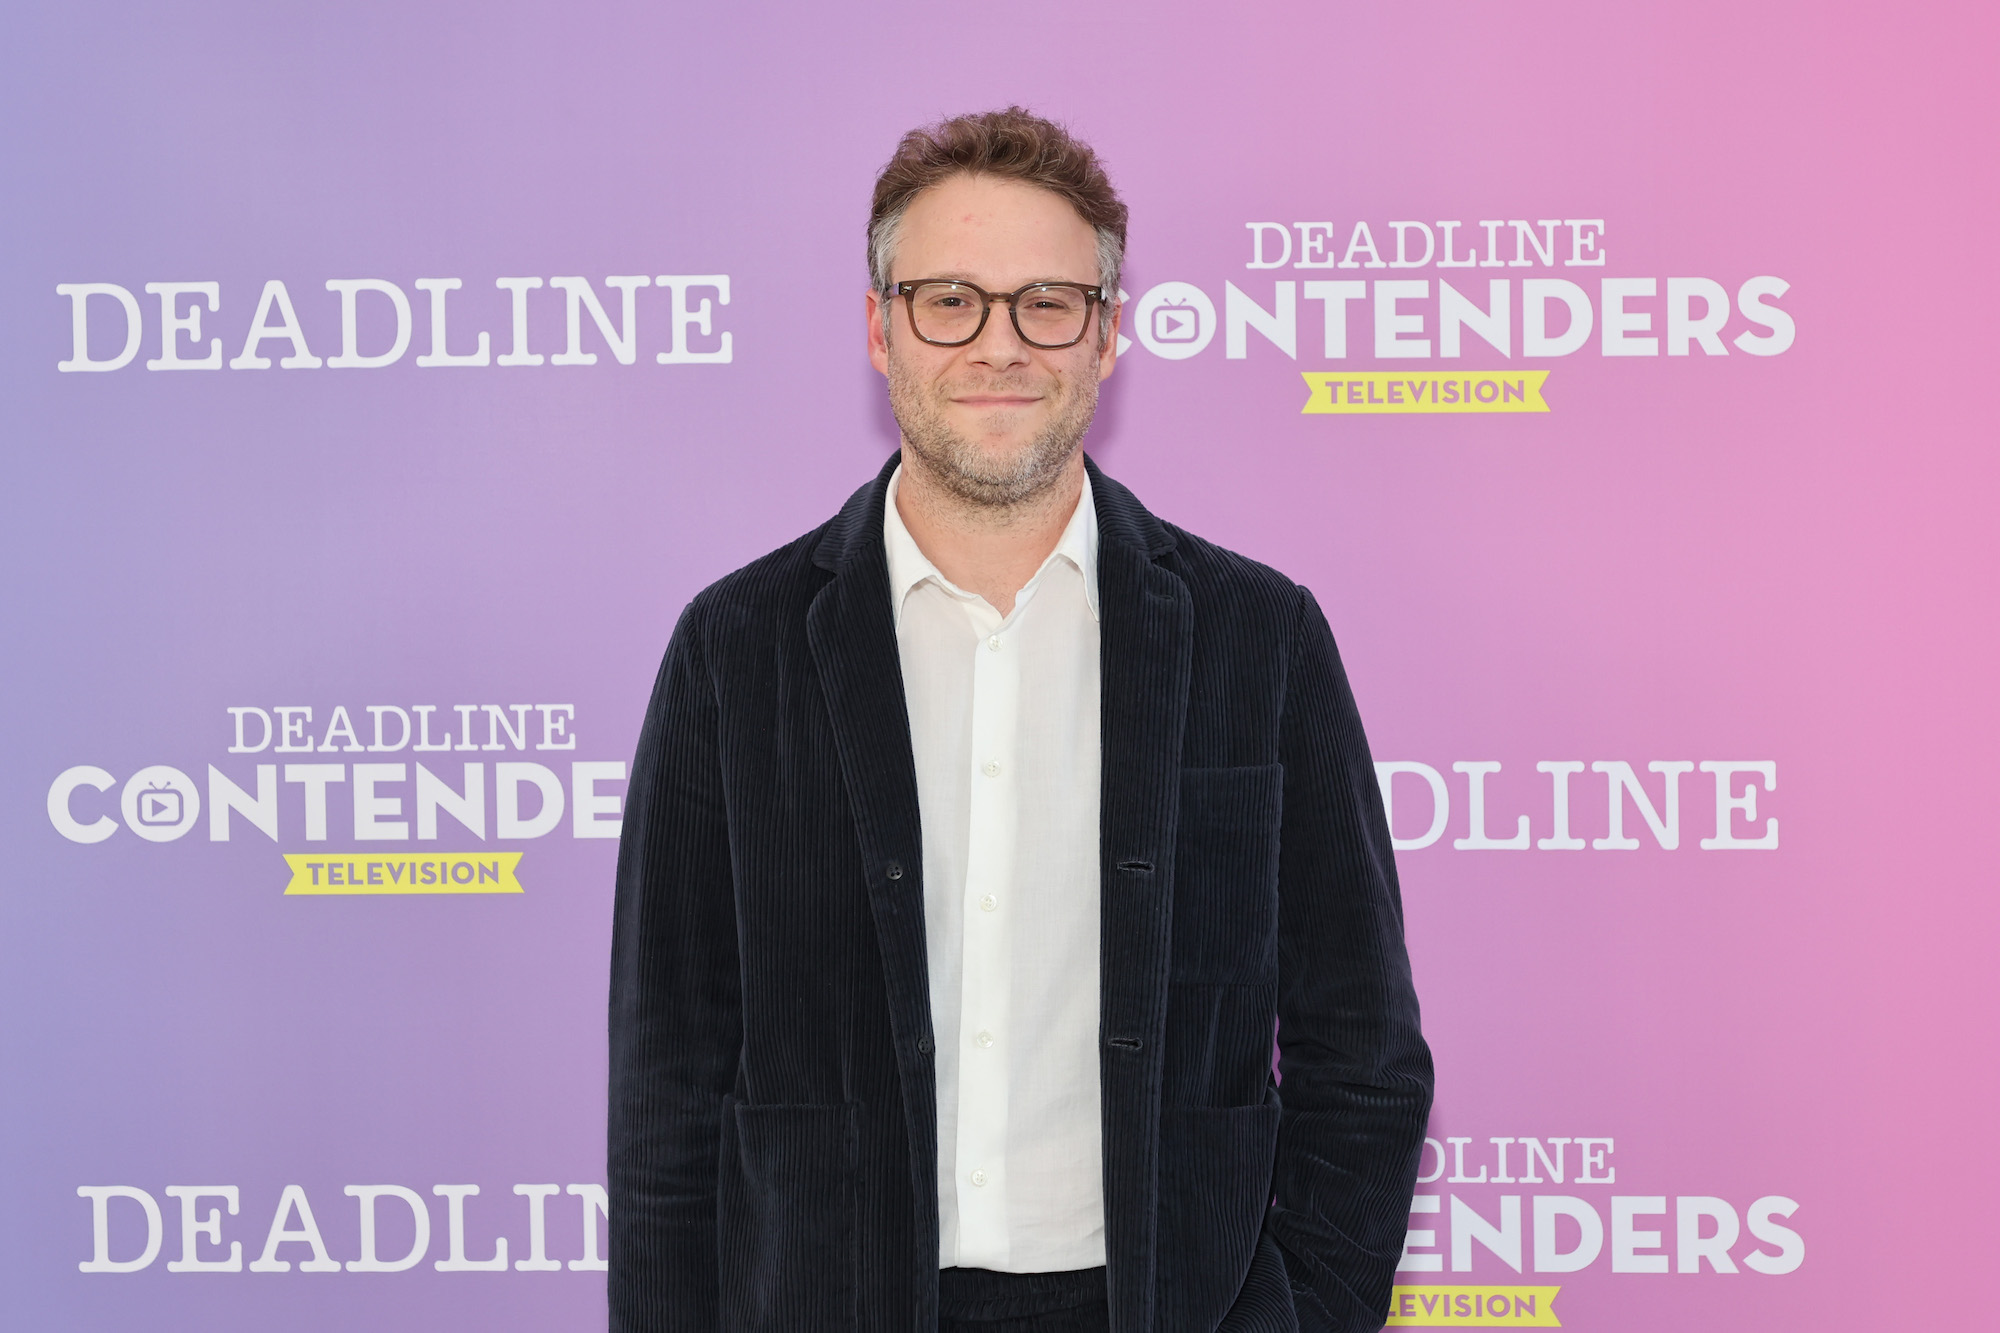 'Dawson's Creek' featured a young Seth Rogen, seen here at Deadline Contenders Television